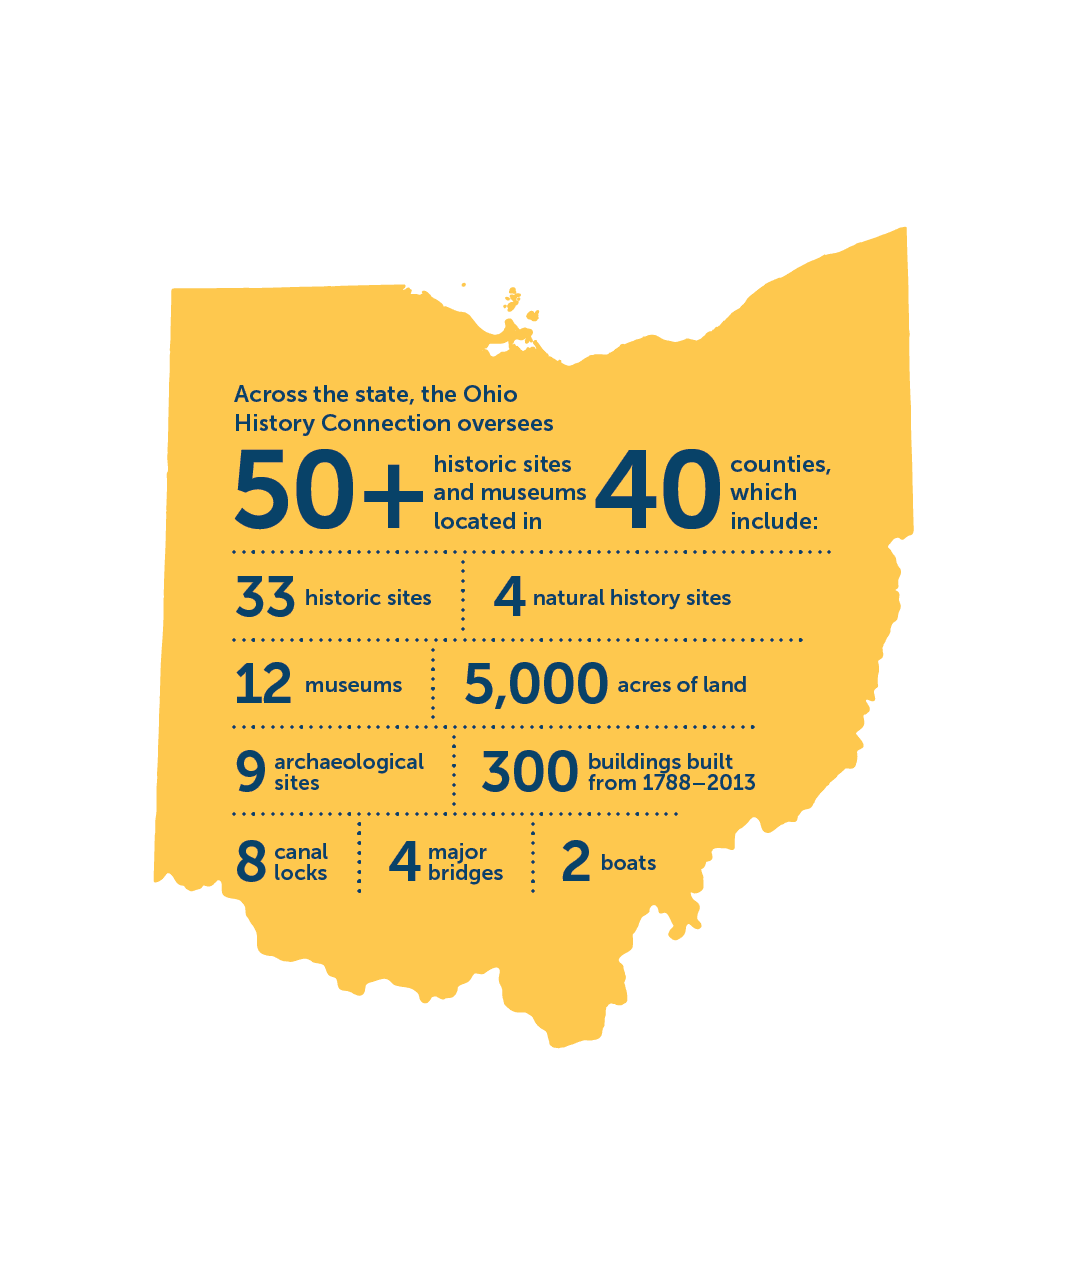 Ohio shaped image with the text "Across the state, the Ohio History Connection oversees 50+ historic sites and museums located in 40 counties which include: 33 historic sites, 4 natural history sites, 12 museums, 5,000 acres of land, 9 archaeological sites, 300 buildings built from 1788-2013, 8 canal locks, 4 major bridges and 2 boats.